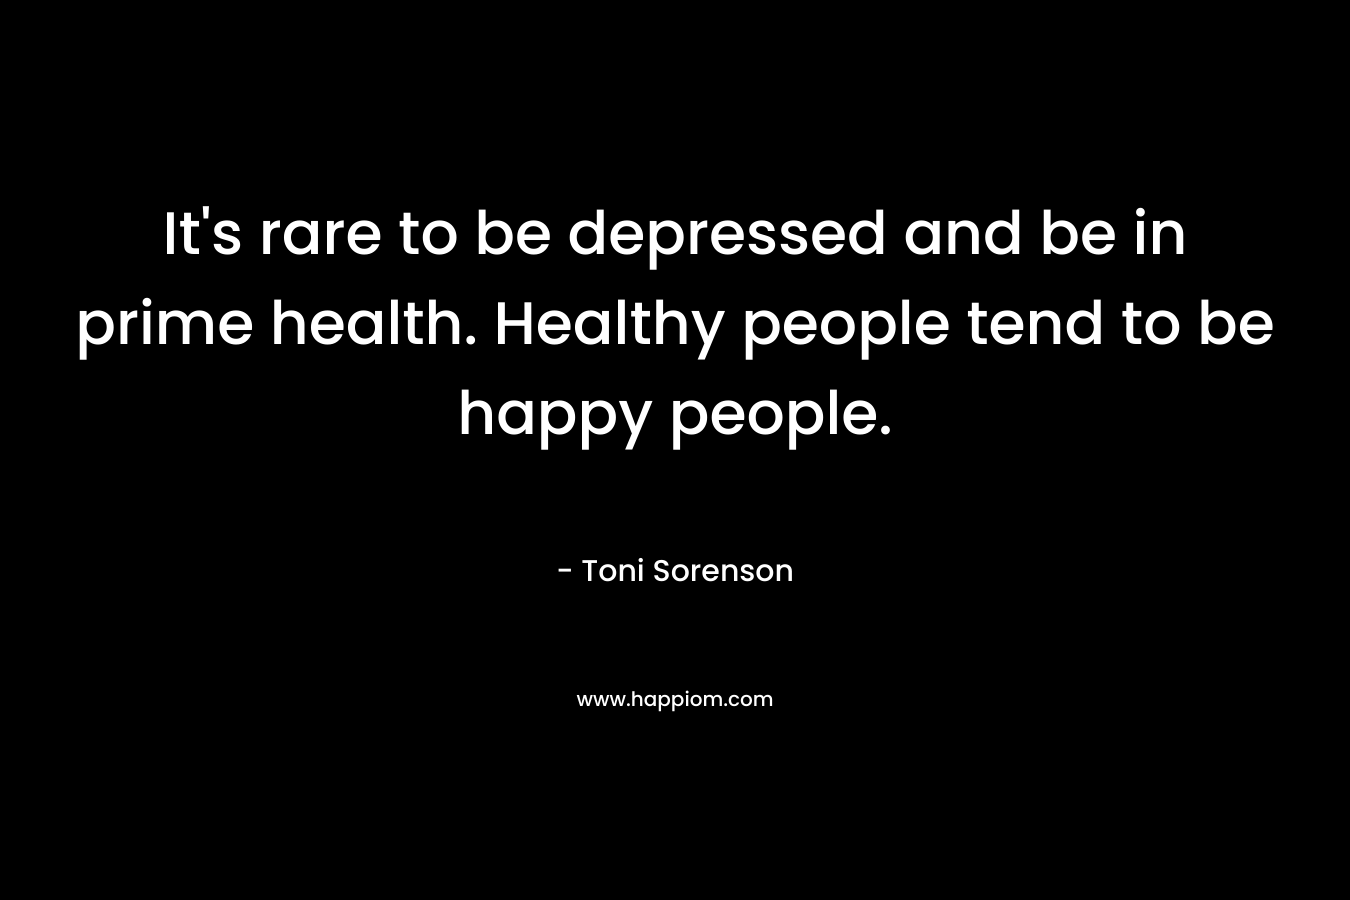 It’s rare to be depressed and be in prime health. Healthy people tend to be happy people. – Toni Sorenson